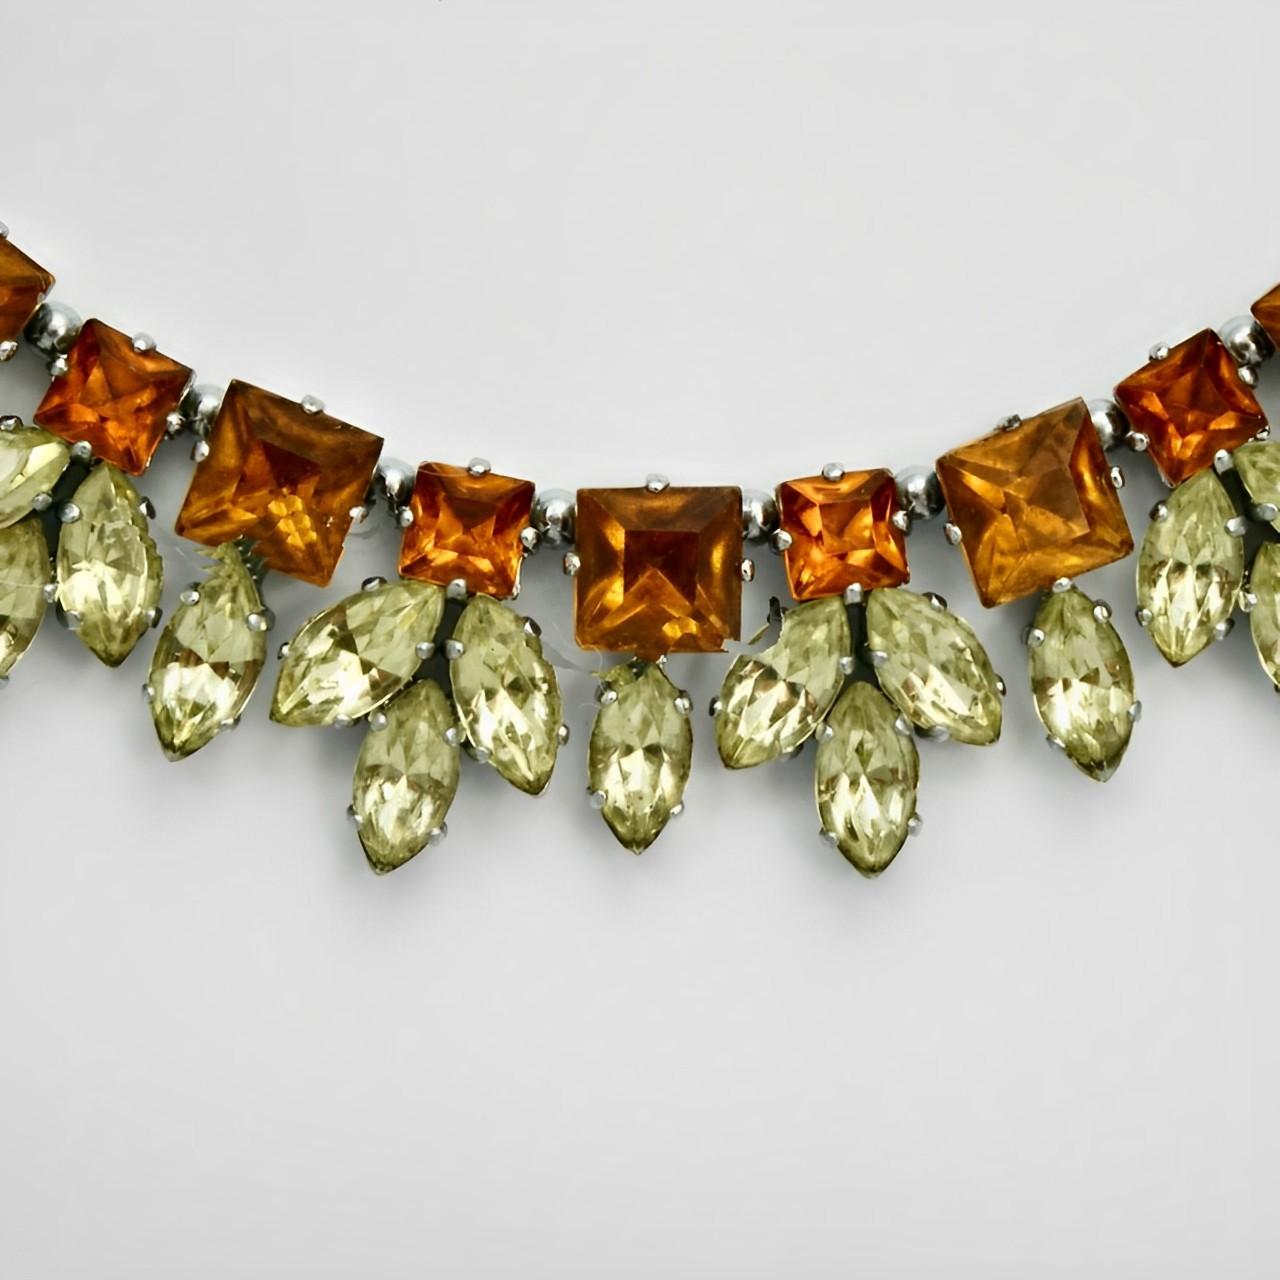 Beautiful silver tone collar / necklace set with orange and lemon rhinestones strung on to wire. Each rhinestone section is separated by a silver tone ball. It is a small size measuring inside length approximately 38 cm / 15 inches by width 2 cm /